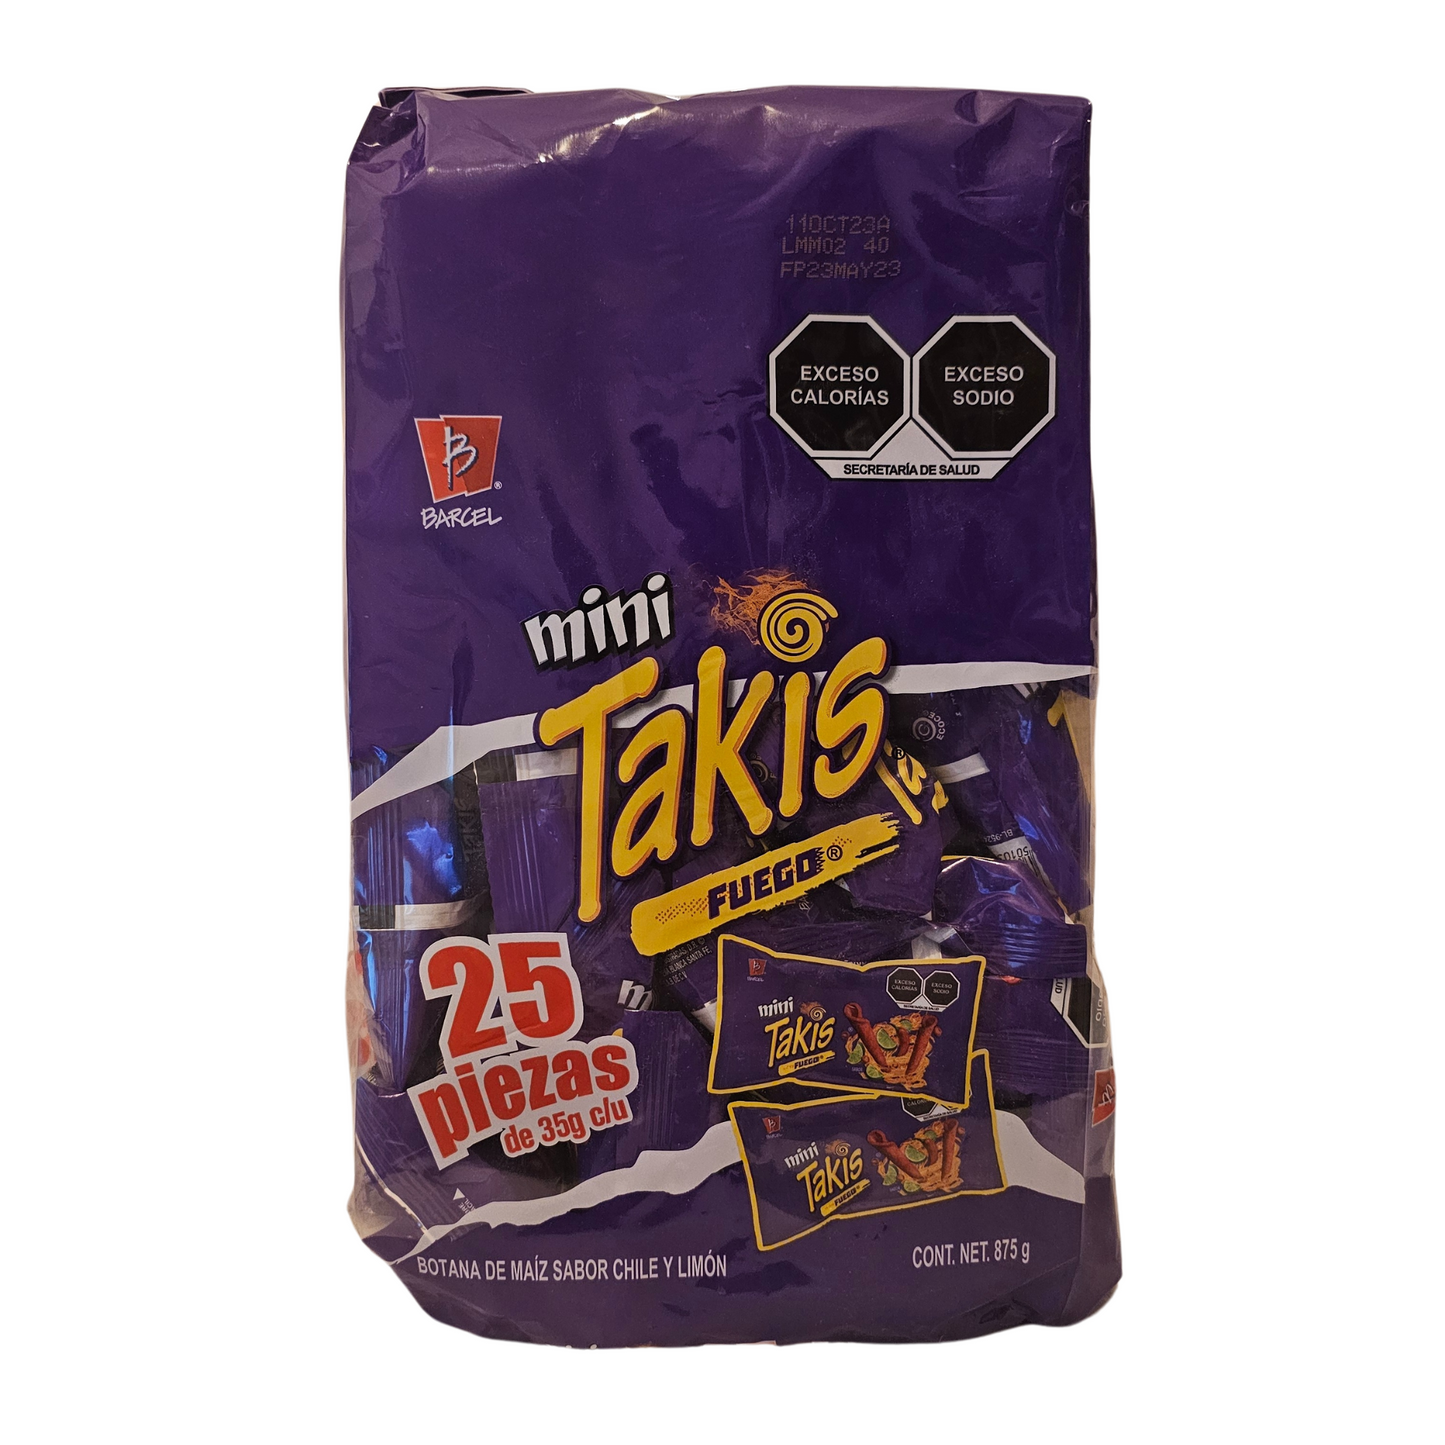 TAKIS FUEGO CHIPS 35g